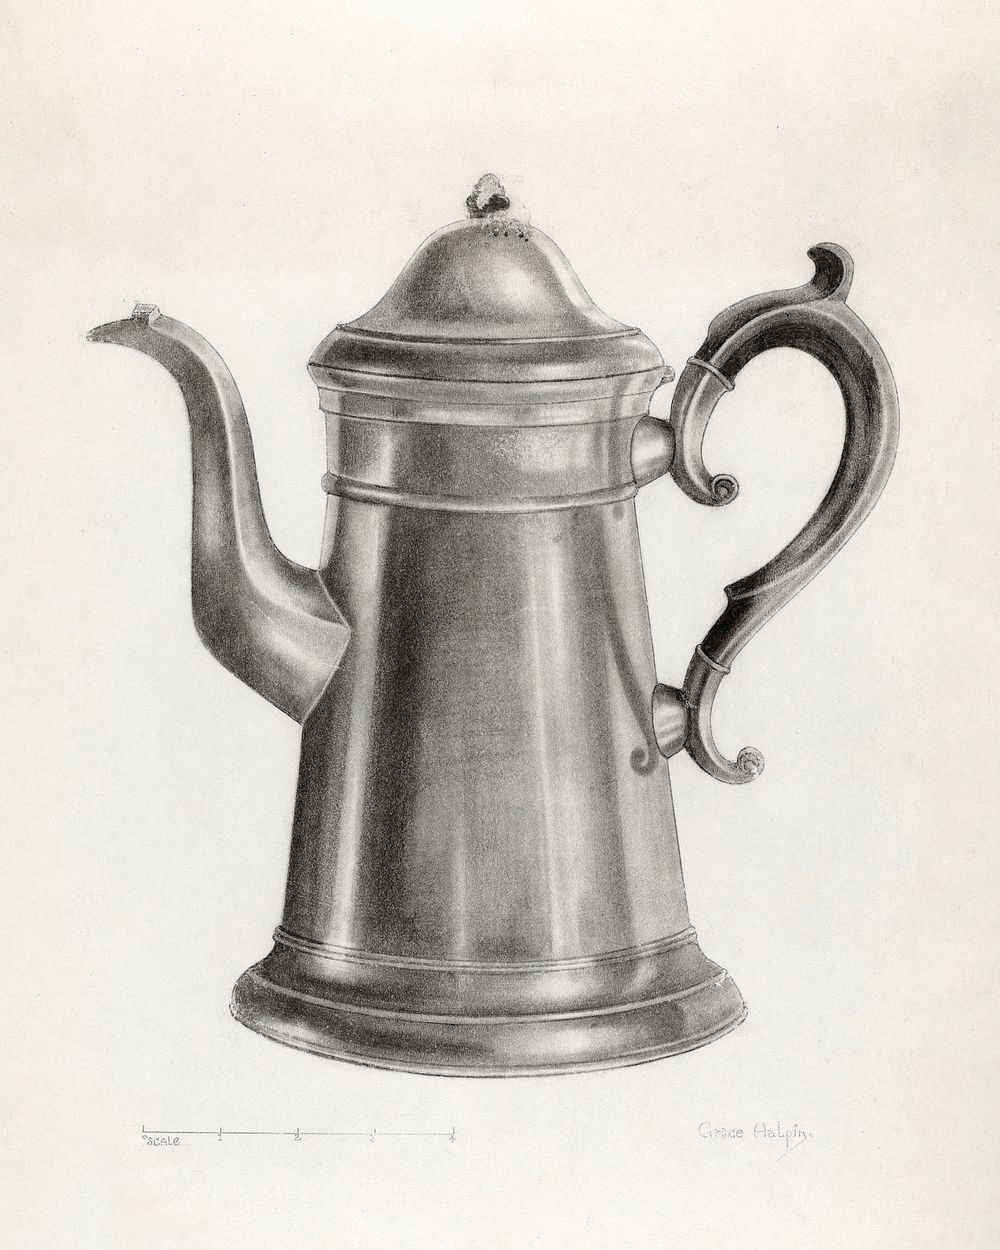 Pewter Coffee Pot (1935&ndash;1942) by Grace Halpin. Original from The National Gallery of Art. Digitally enhanced by…